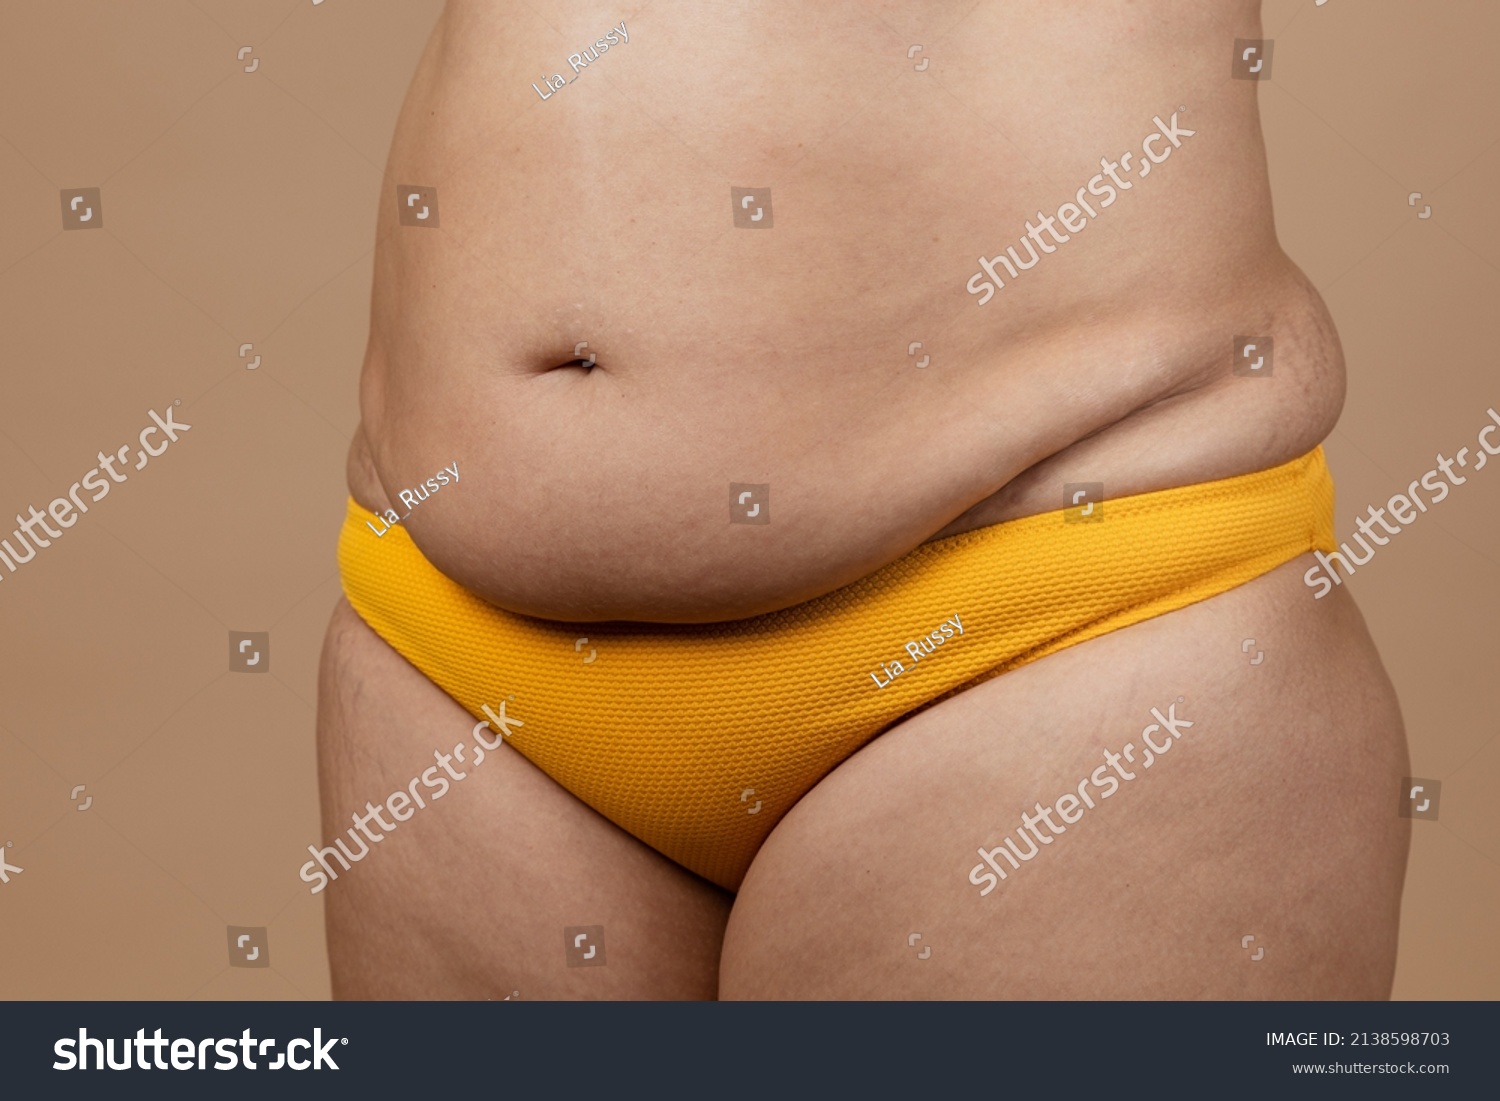 Cropped Image Overweight Woman Fat Naked Stock Photo Shutterstock